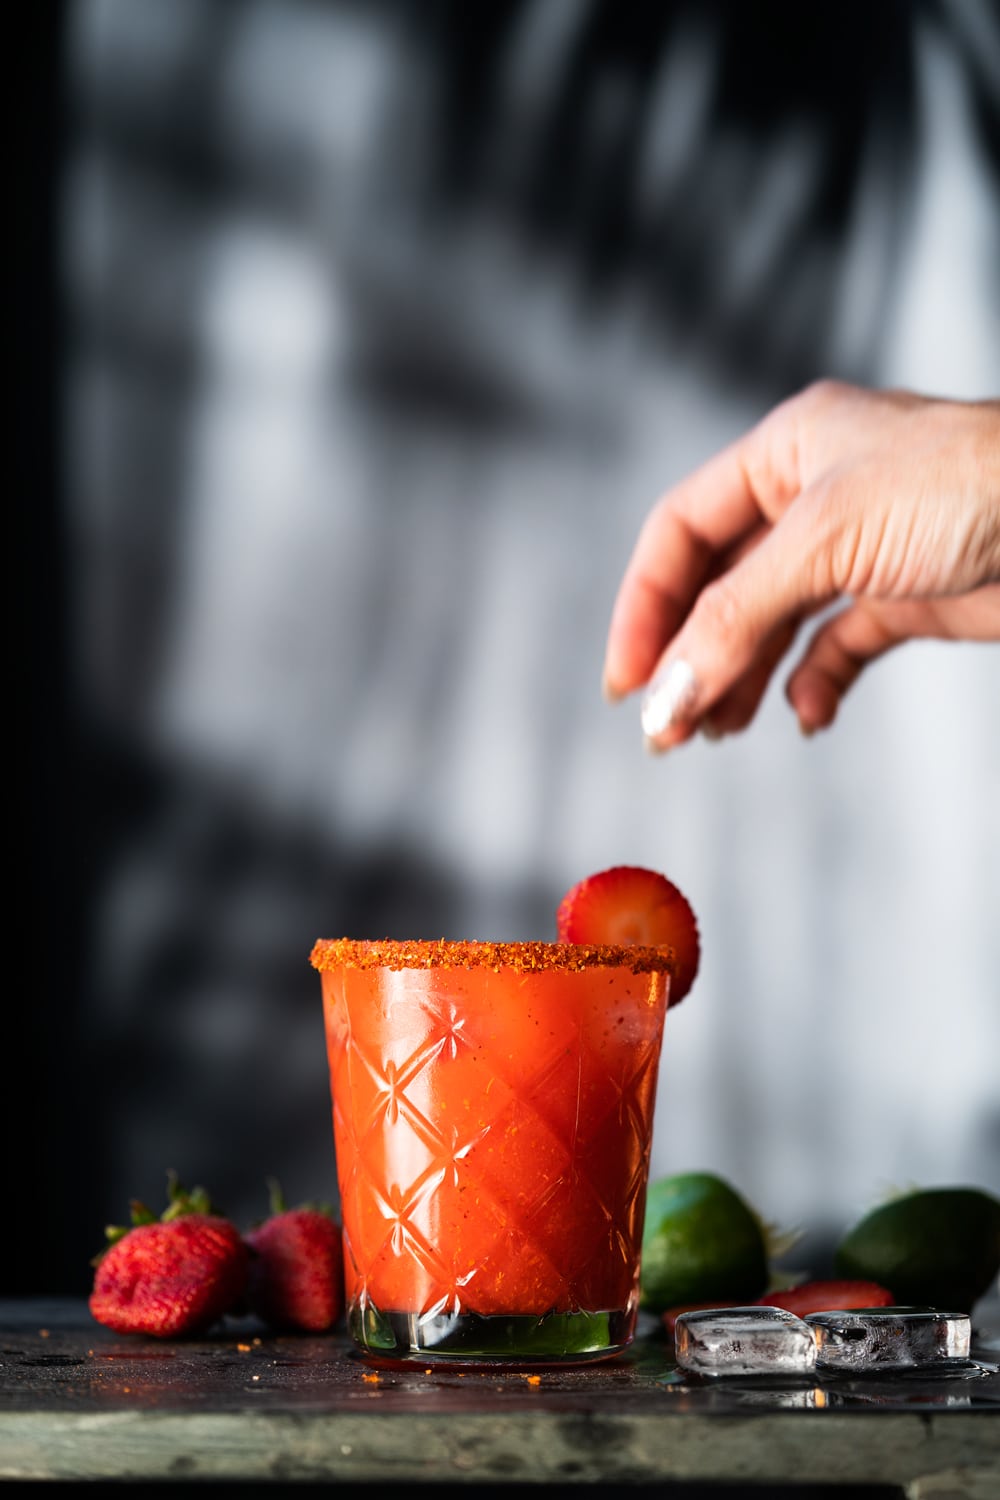 Placing a strawberry slice on the rim of a paleo strawberry margarita